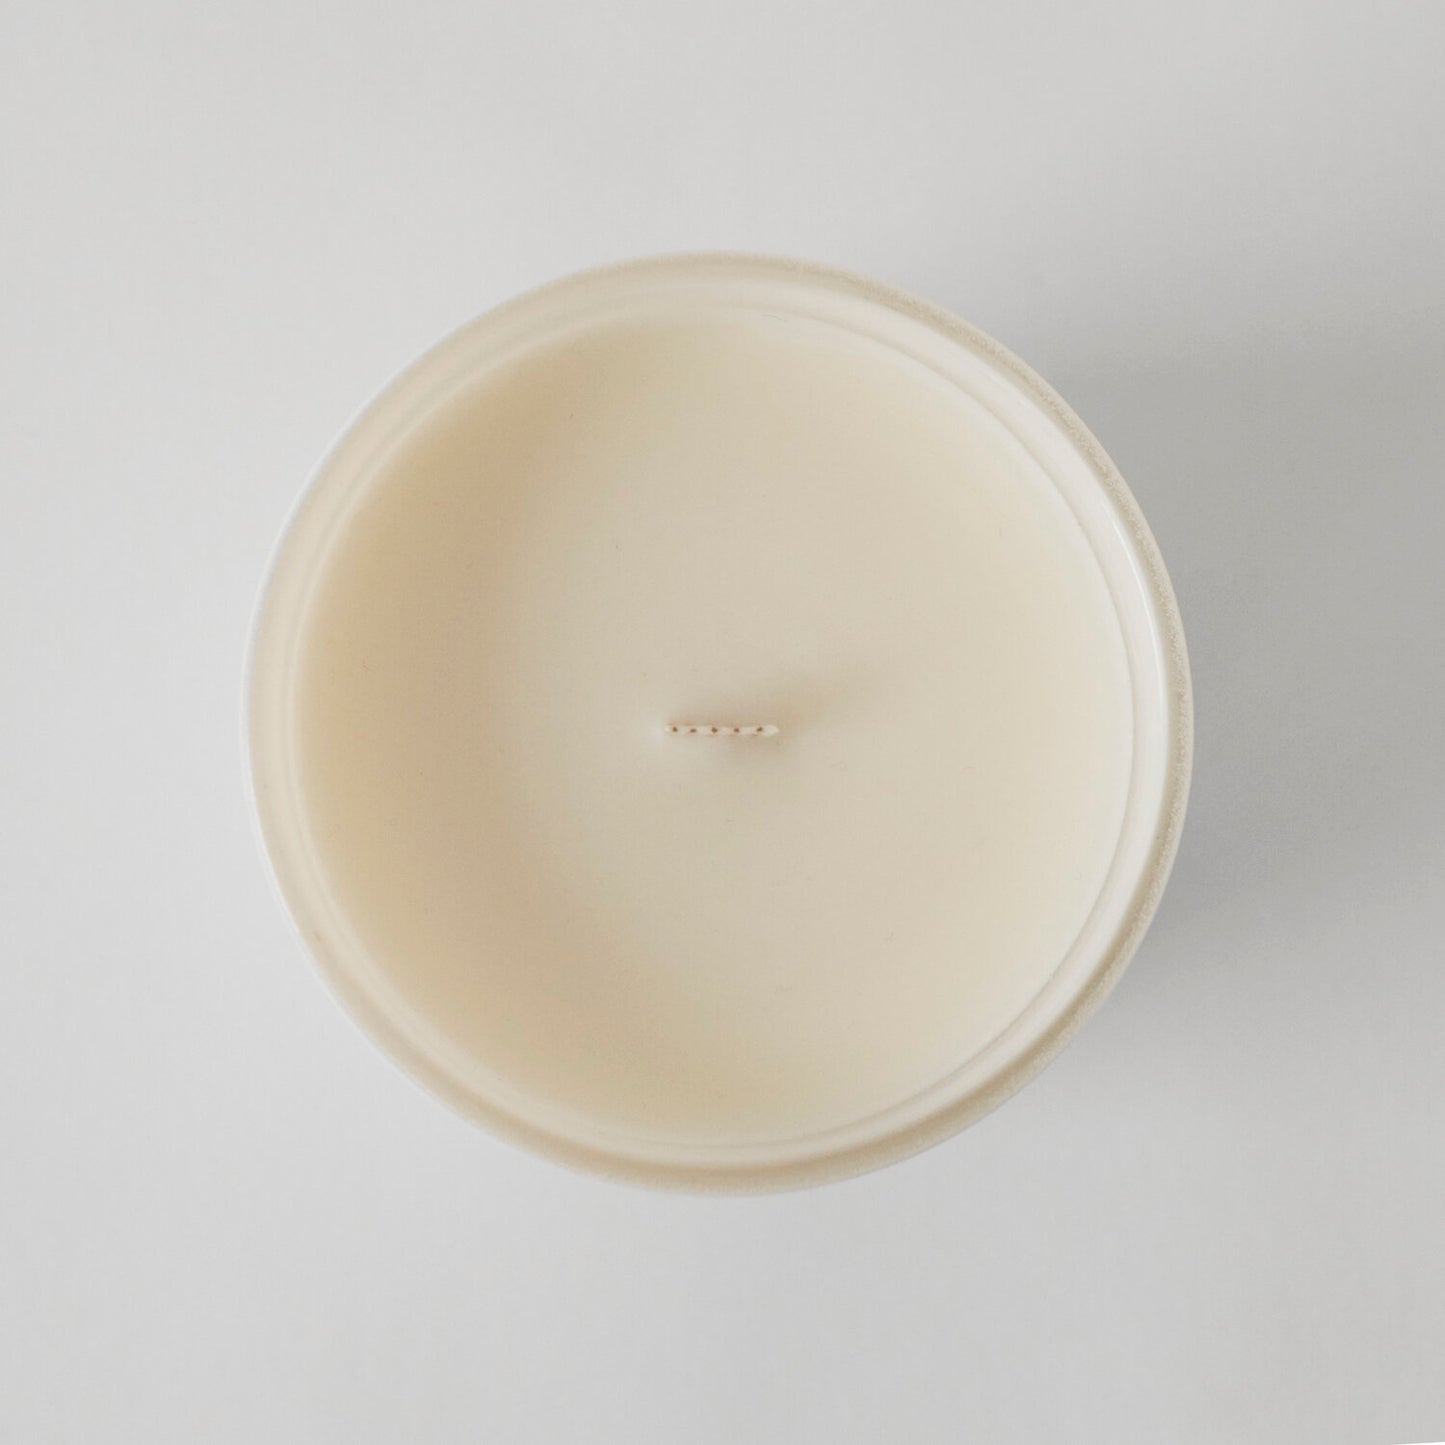 Union of London - Wild Fig - Large Candle